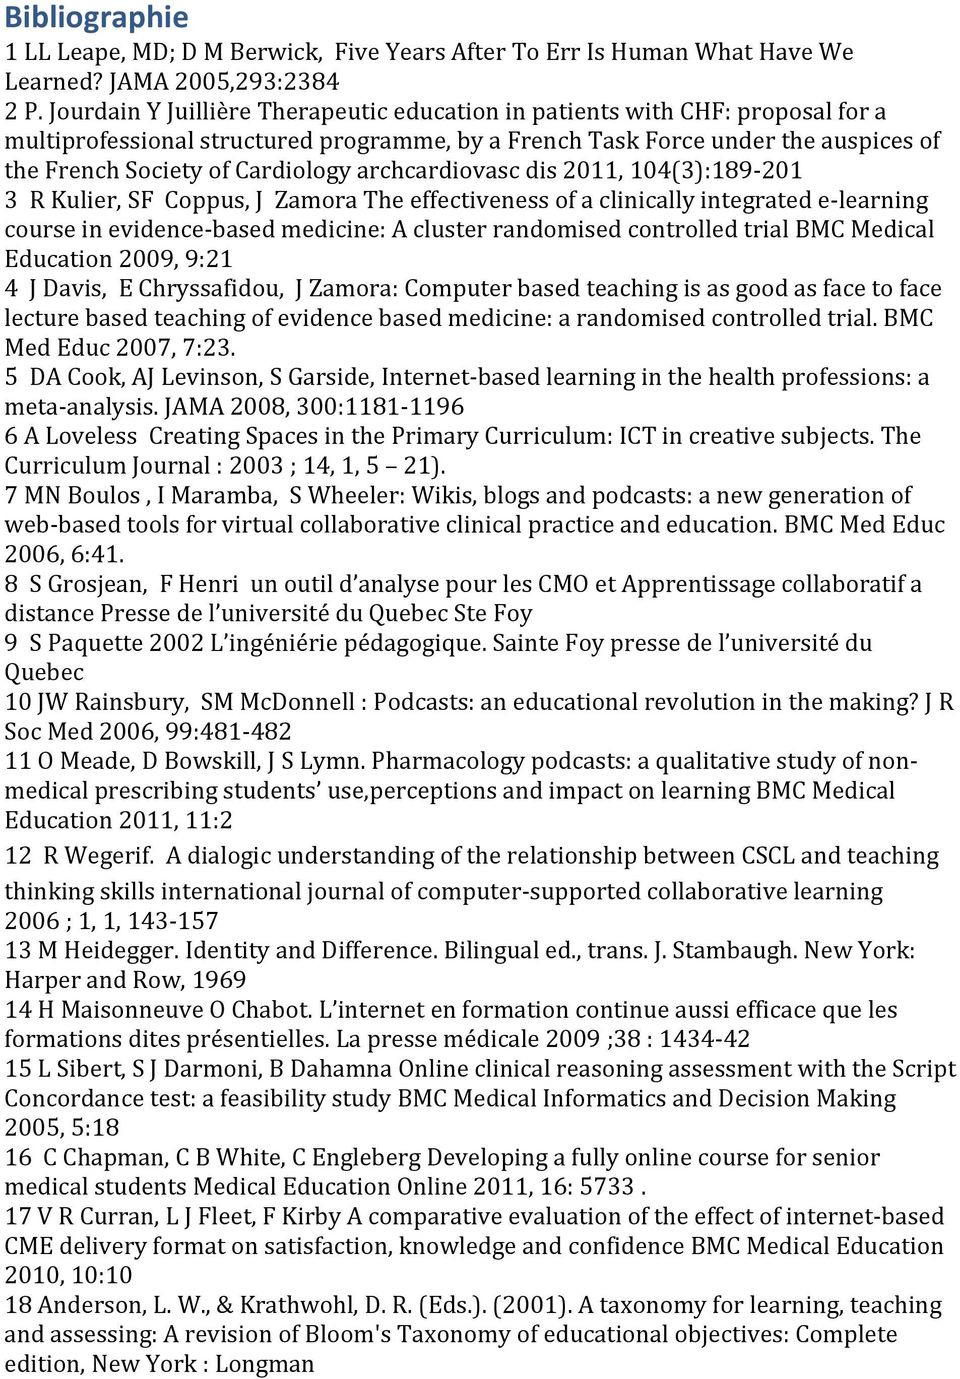 archcardiovasc dis 2011, 104(3):189-201 3 R Kulier, SF Coppus, J Zamora The effectiveness of a clinically integrated e-learning course in evidence-based medicine: A cluster randomised controlled